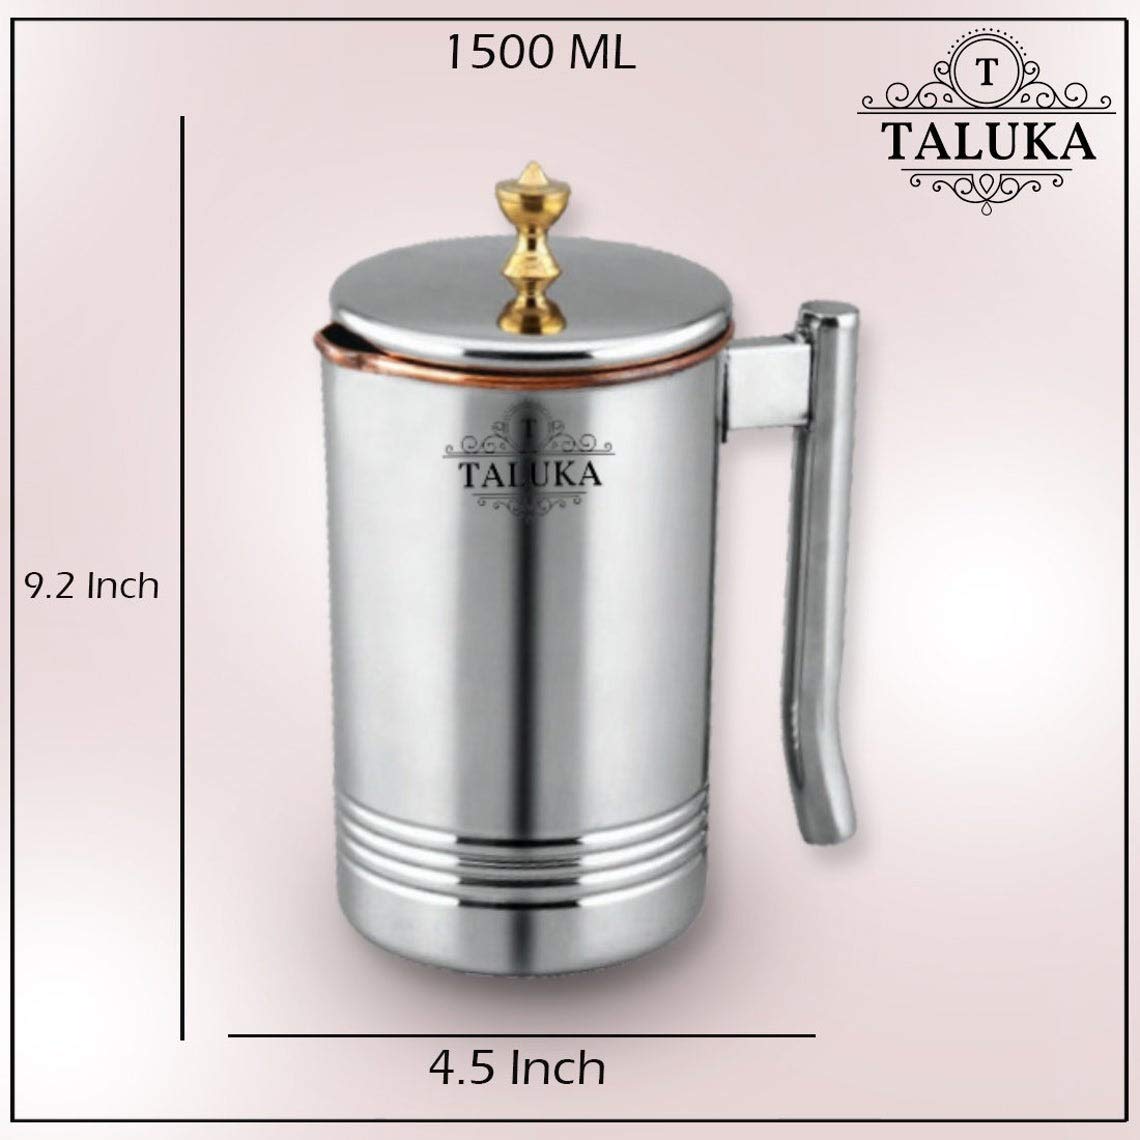 Taluka Copper Stainless Steel Jug Pitcher with Brass Knob, Storage and Serving Water Home Hotel Restaurant (1500 ML) with 6 Copper Glass